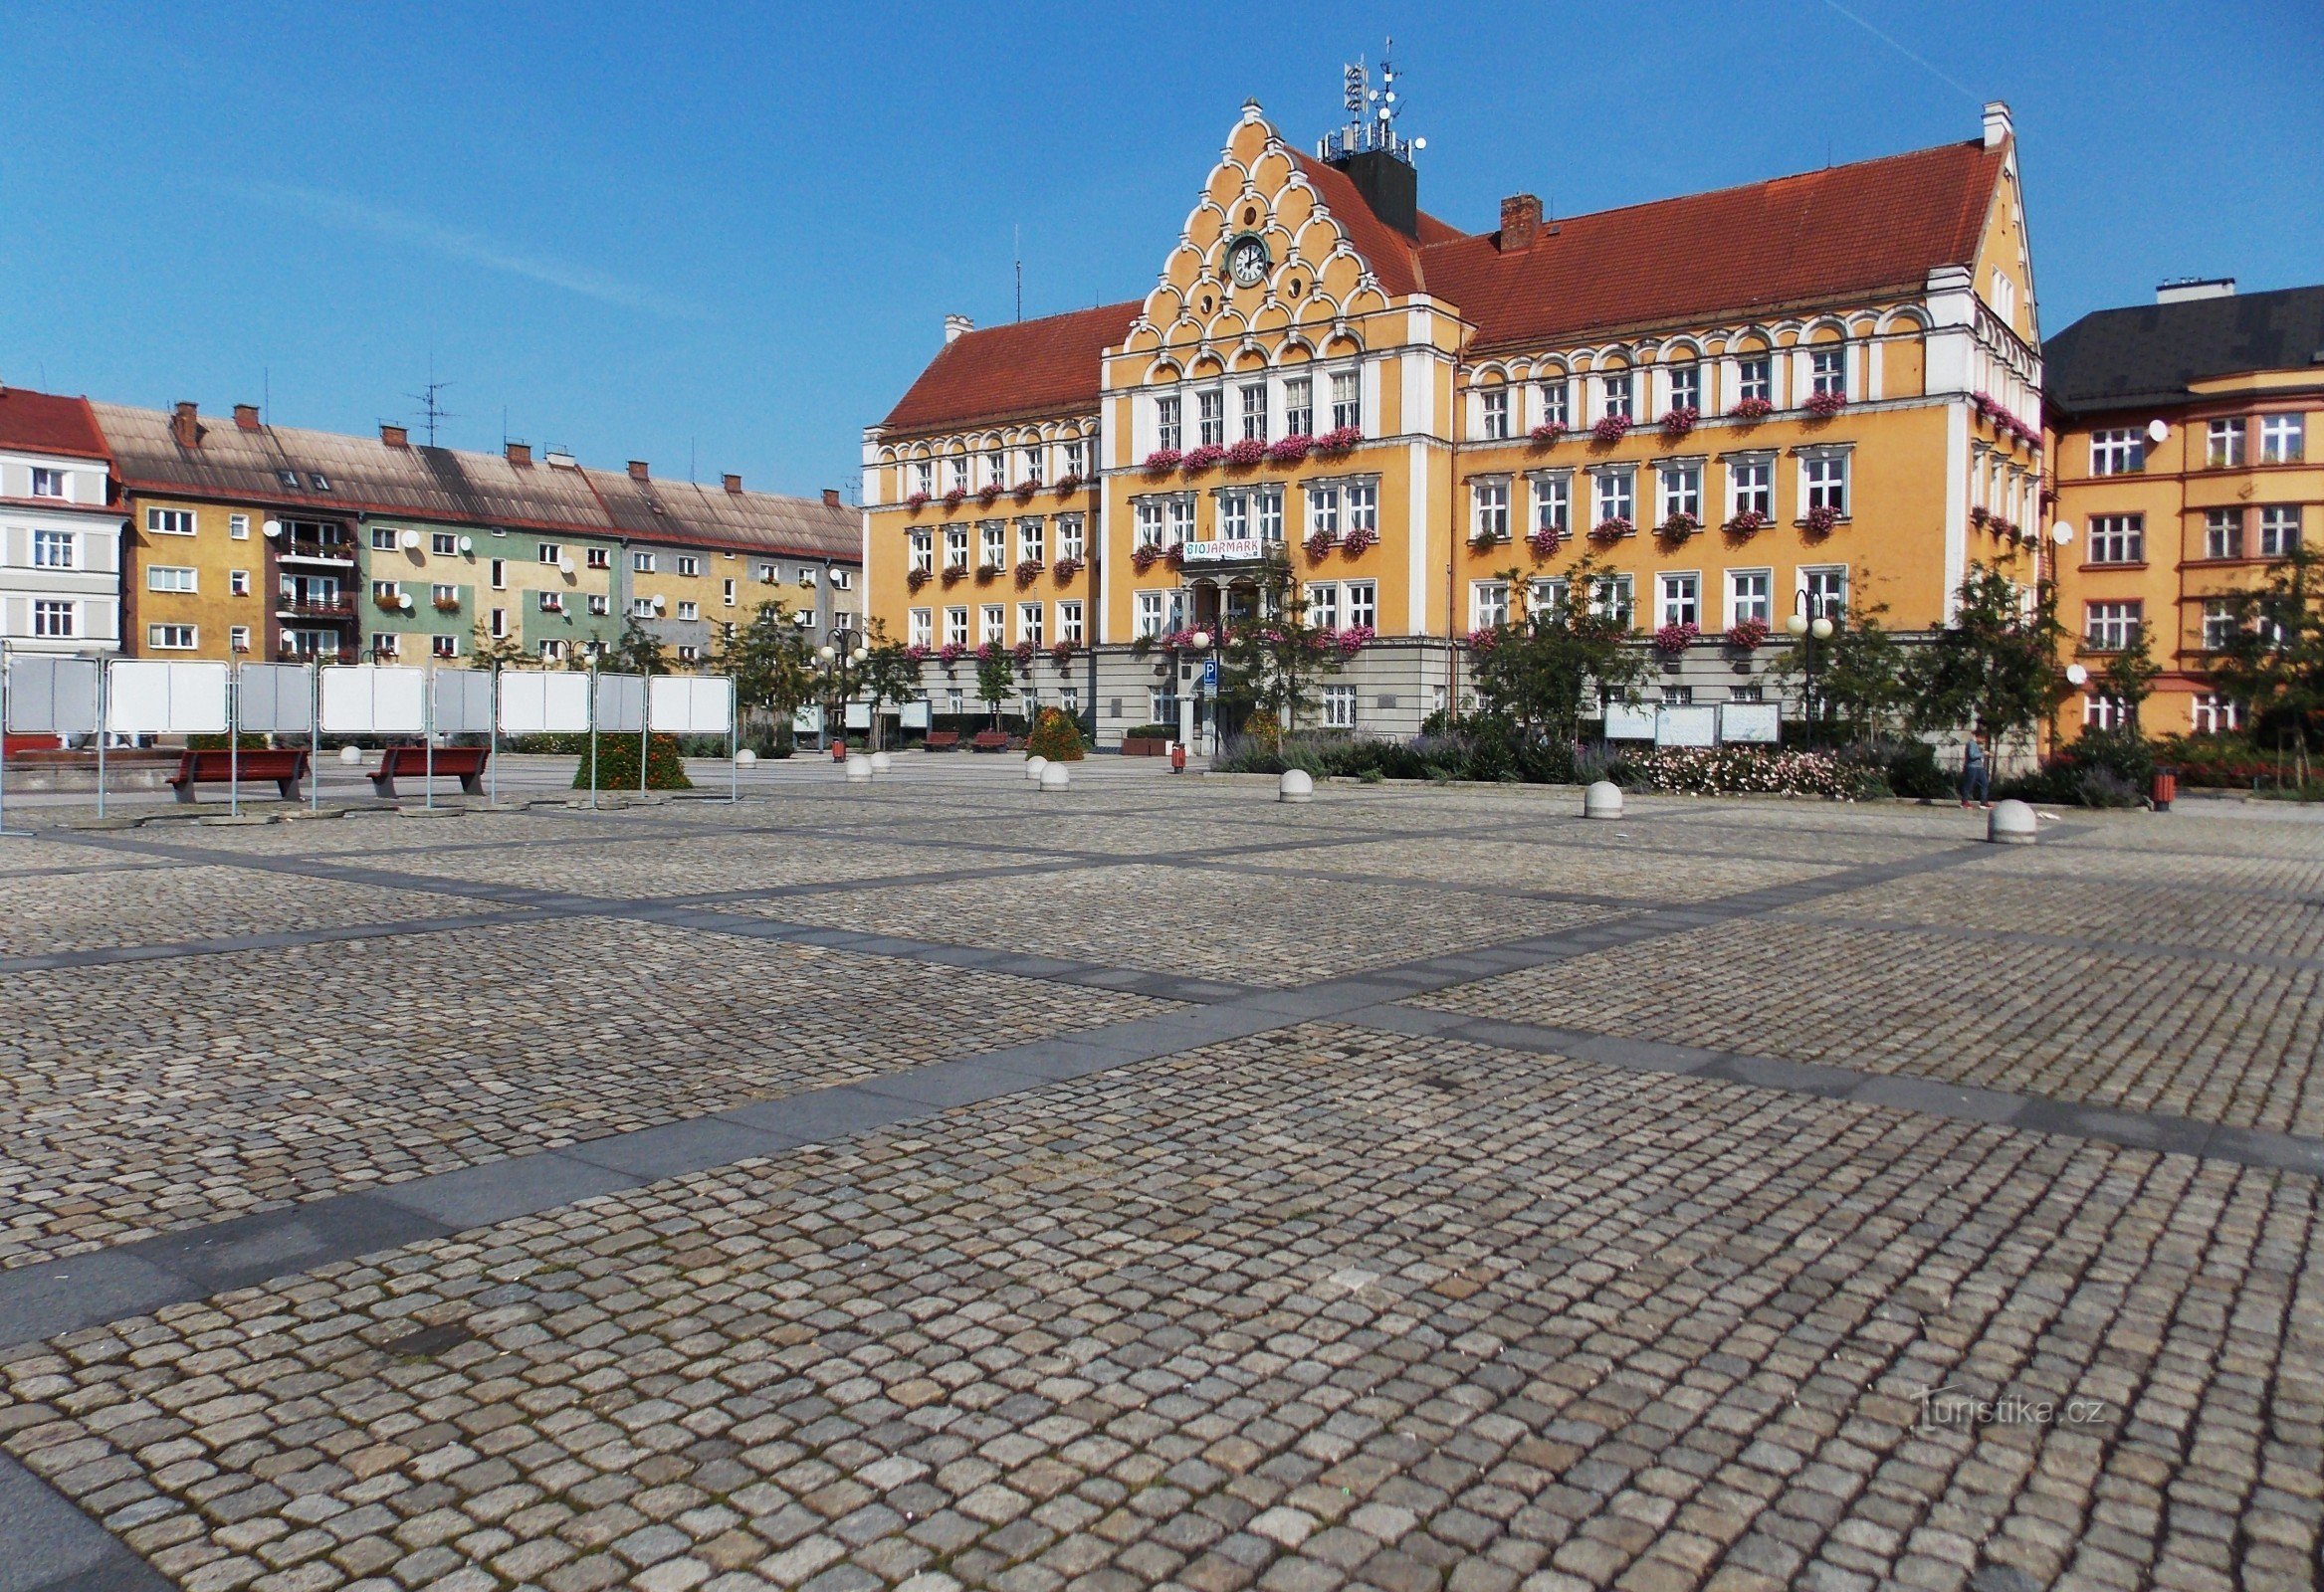 The dominant feature of the Těšín square is the town hall building